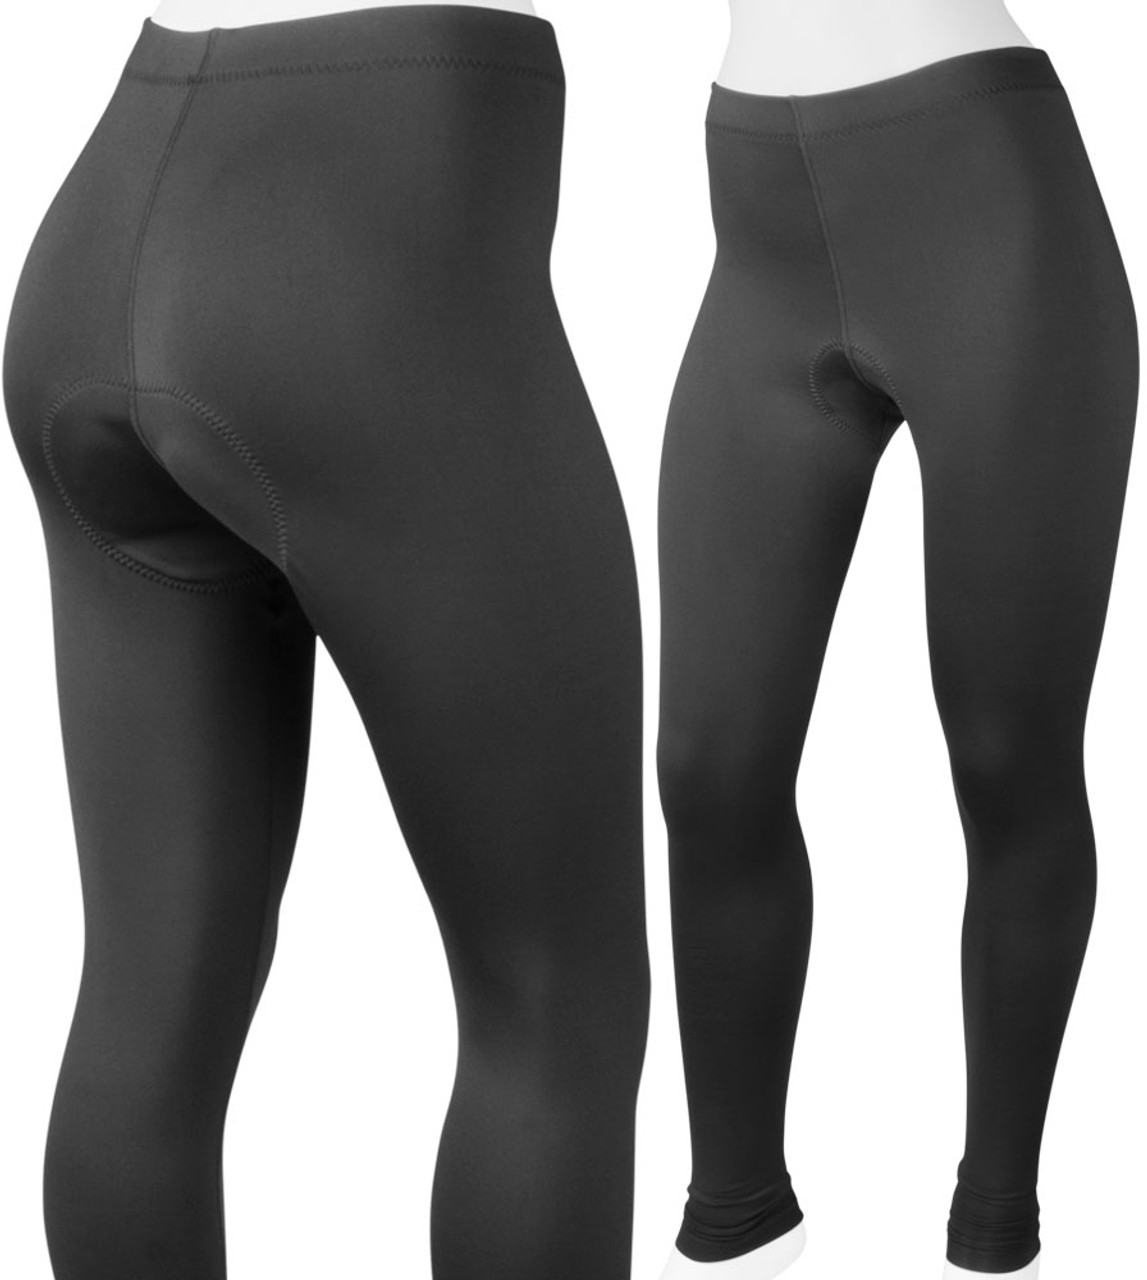 Women Bicycle Tights, Padded Tights for Bicycling